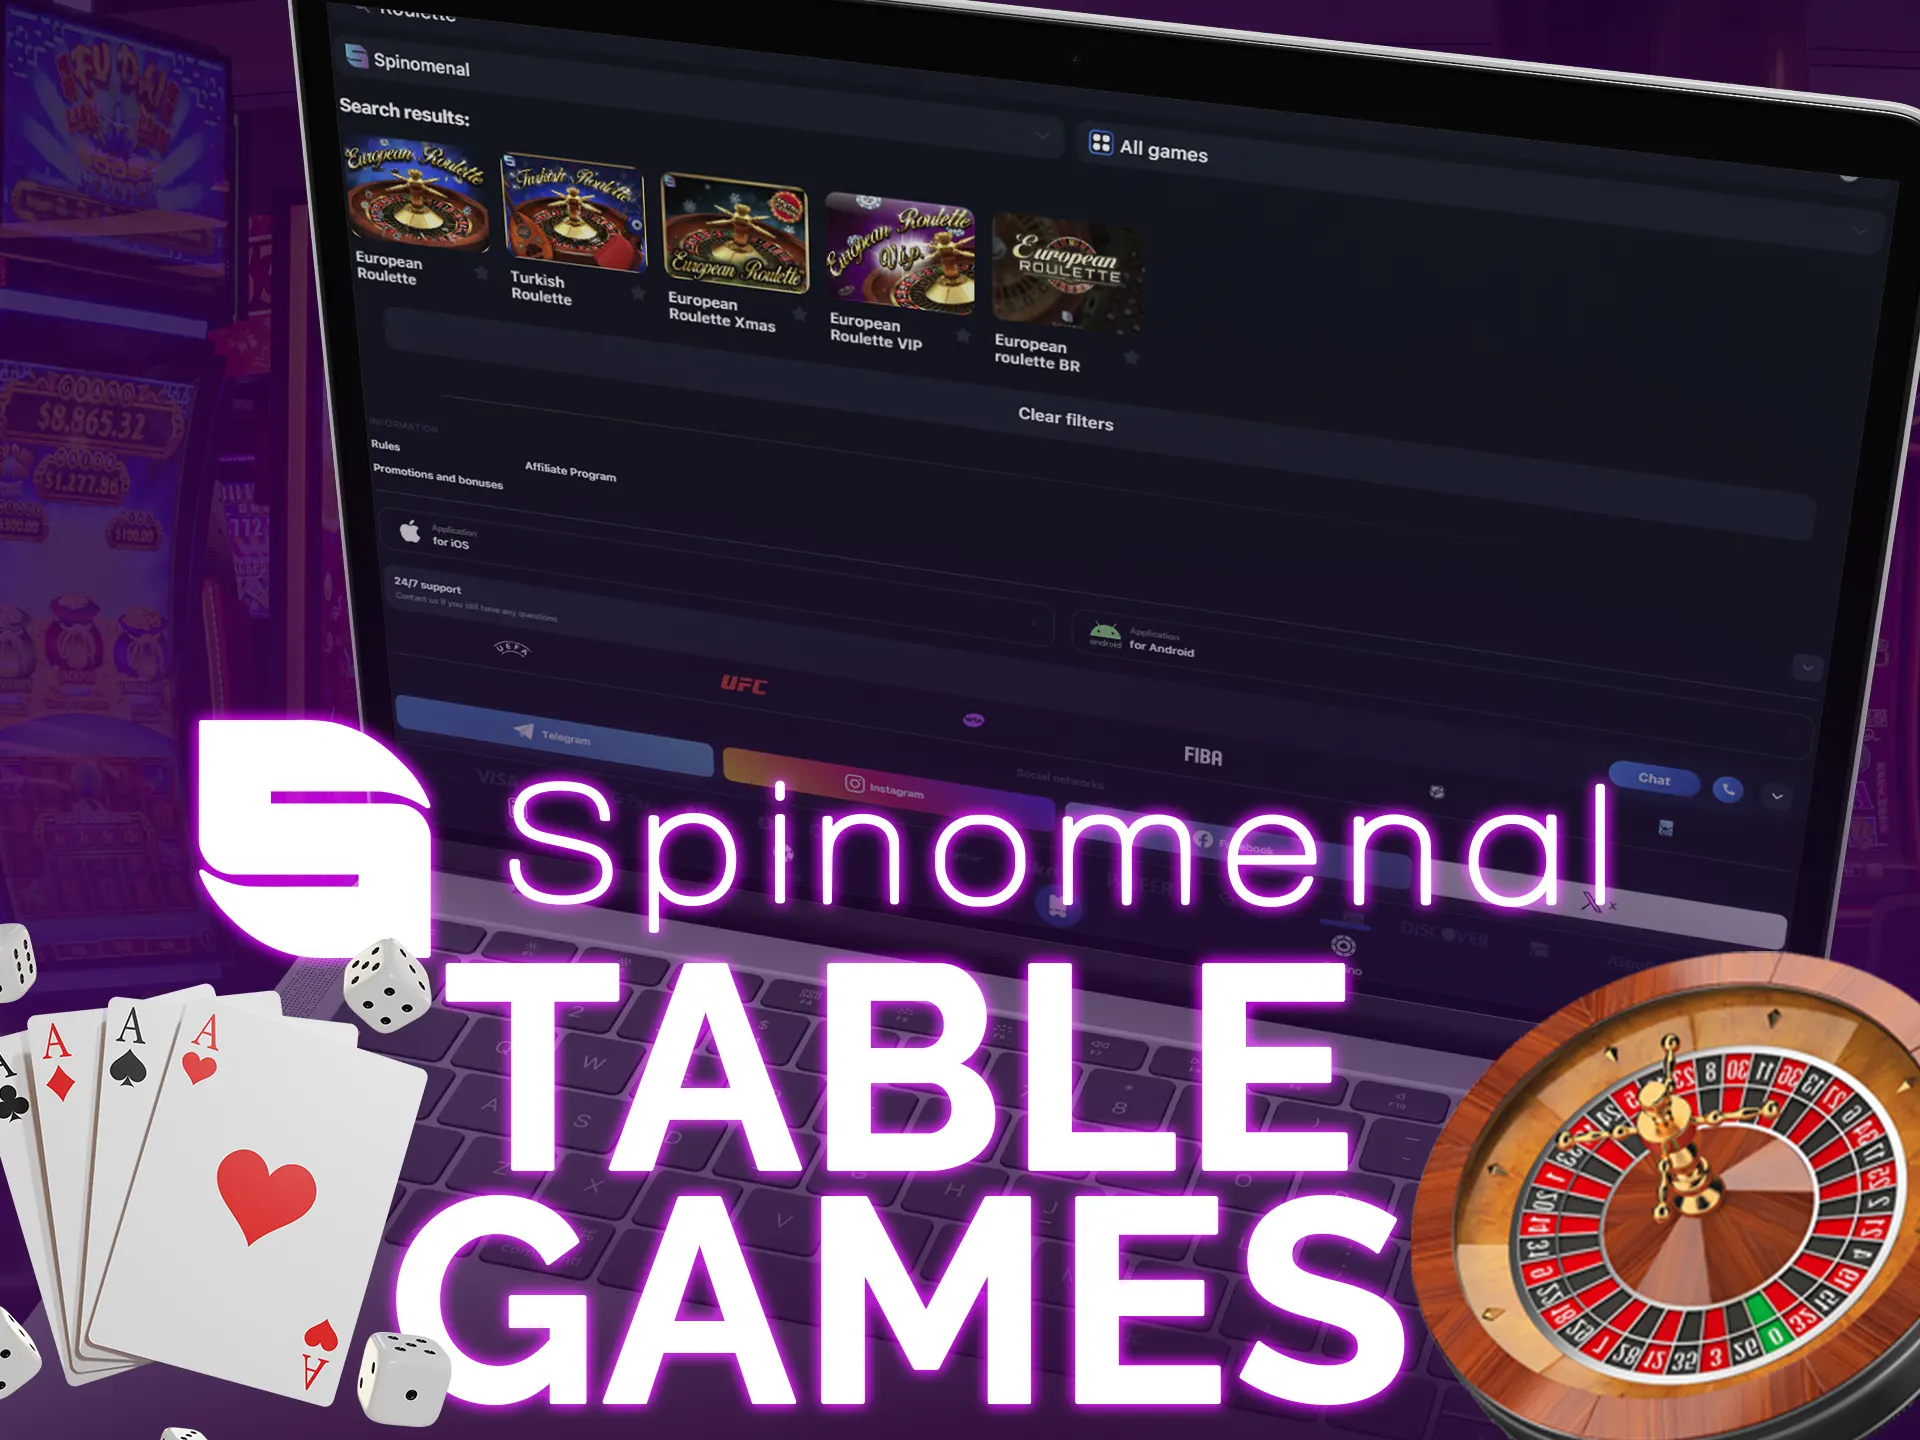 Spinomenal's table games: European Roulette (classic, VIP, Christmas Edition), scratch cards available.